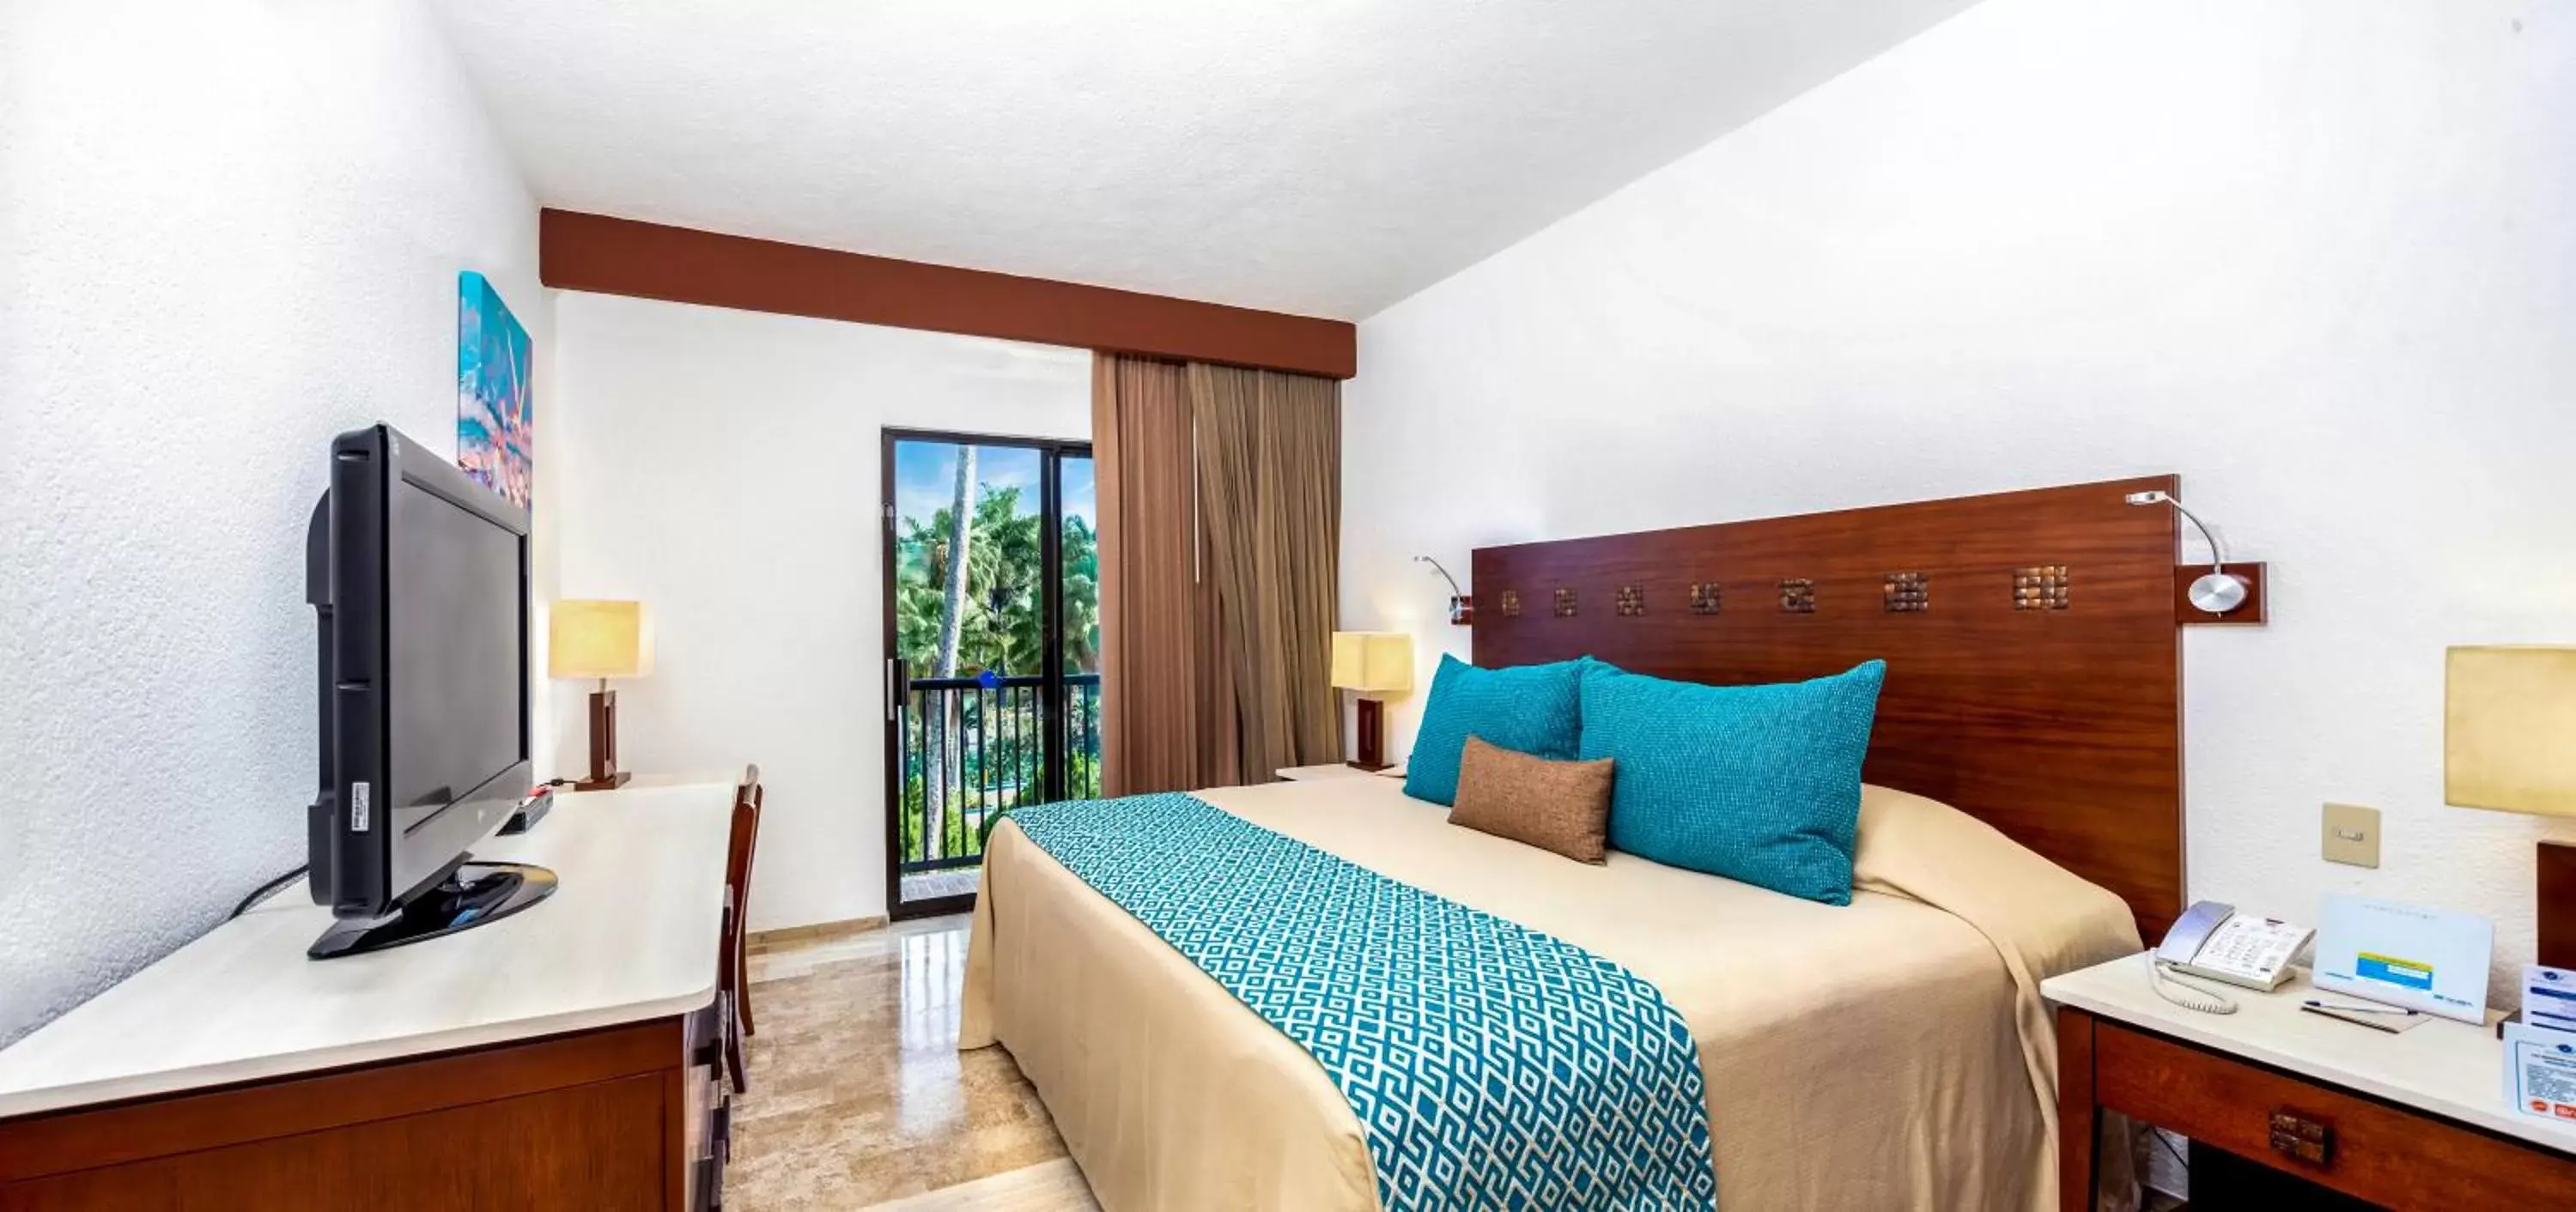 Two-Bedroom Villa Beachfront in The Villas at The Royal Cancun - All Suites Resort